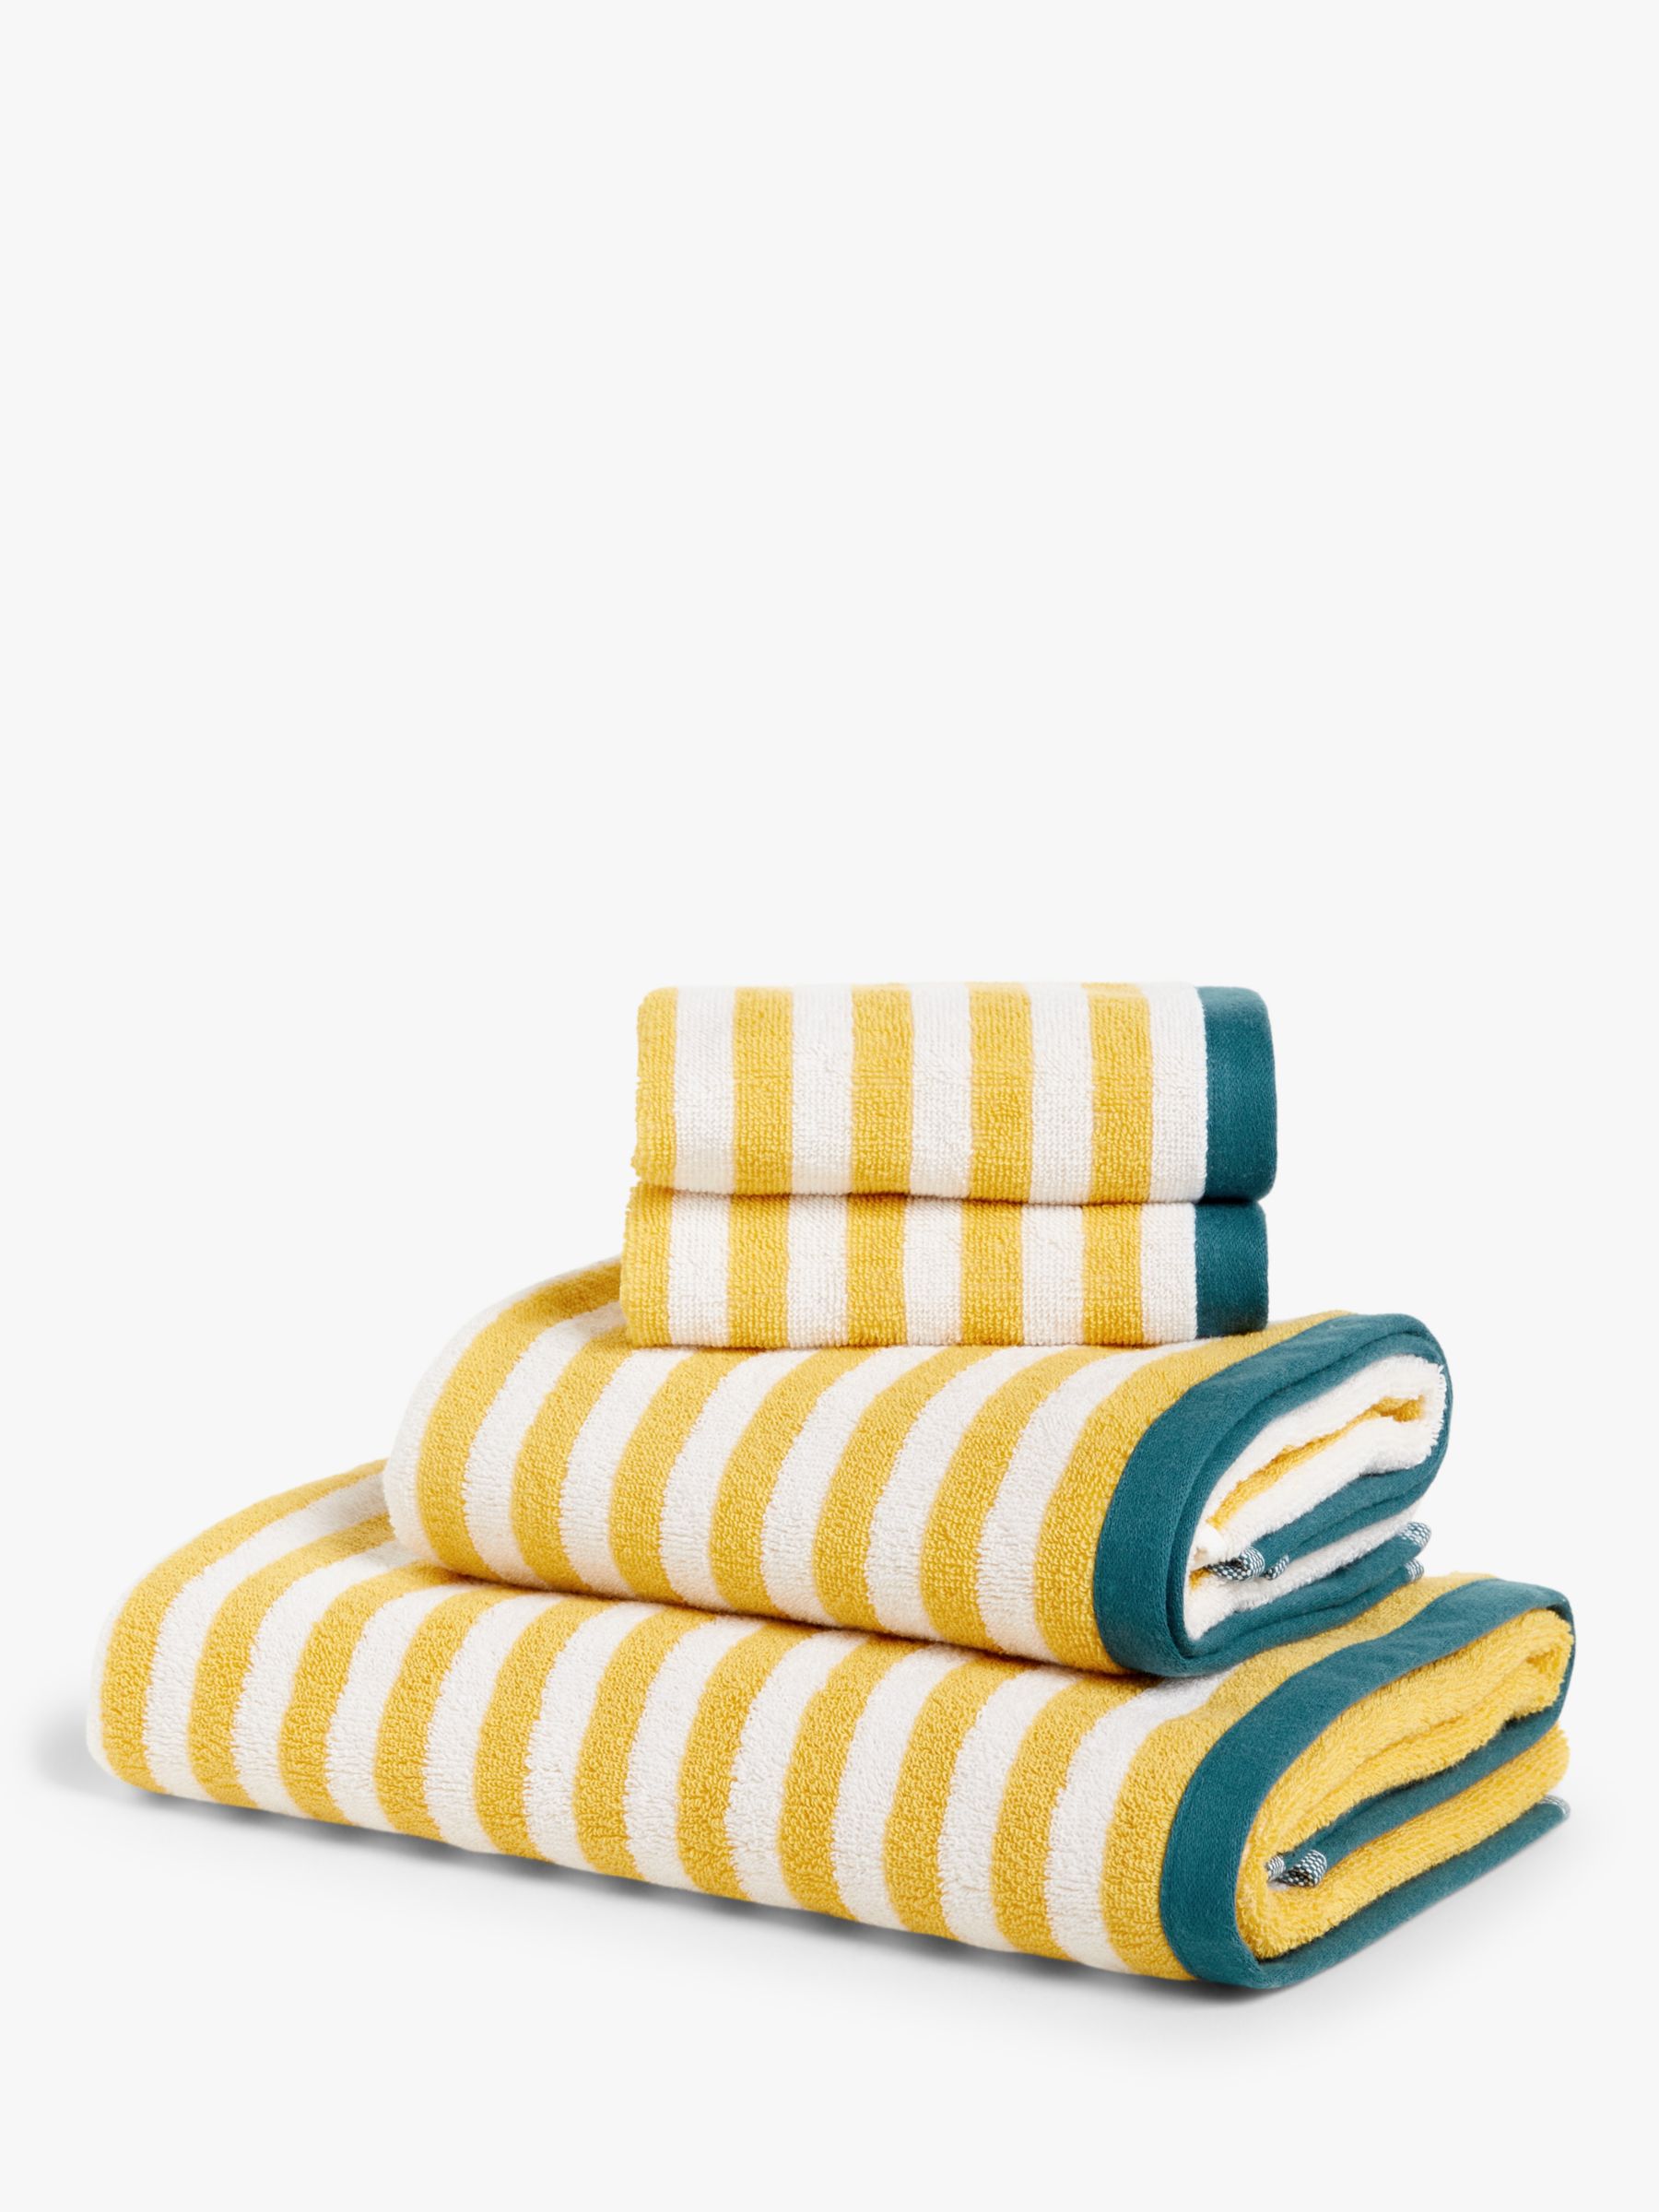 ANYDAY John Lewis & Partners Stripe Towels